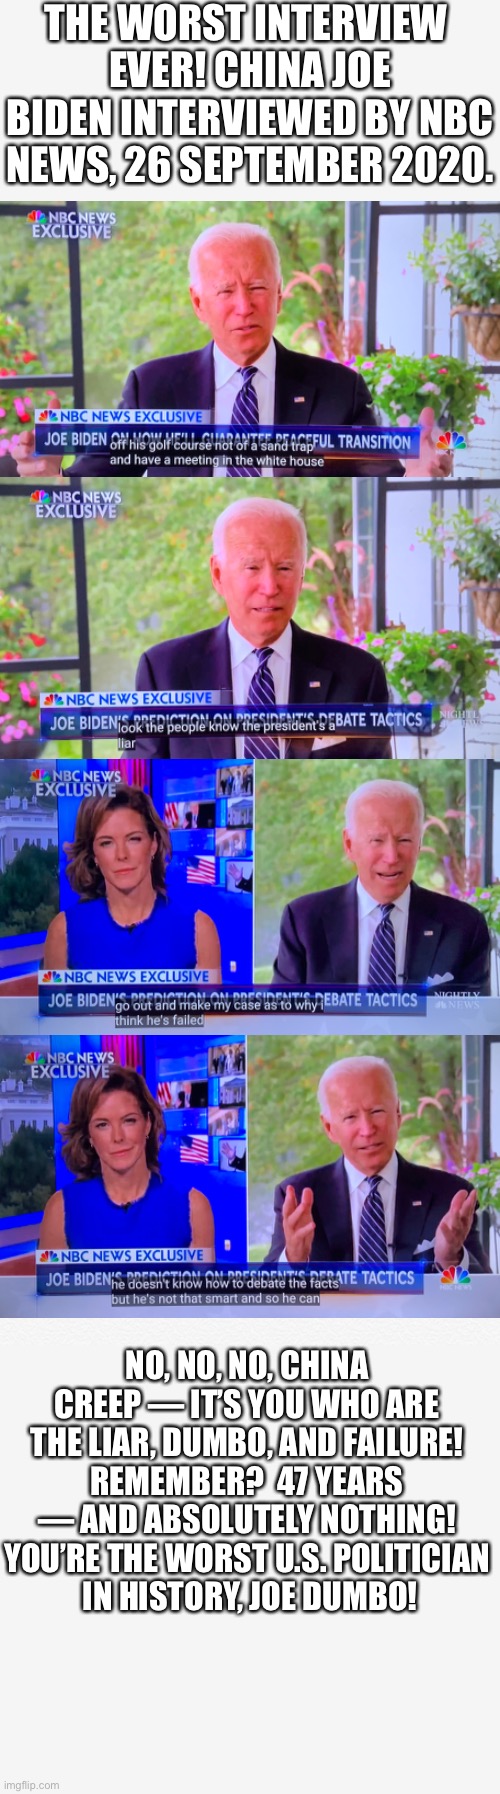 You are the worst U.S. politician in history, China Joe Biden! | THE WORST INTERVIEW 
EVER! CHINA JOE BIDEN INTERVIEWED BY NBC NEWS, 26 SEPTEMBER 2020. NO, NO, NO, CHINA CREEP — IT’S YOU WHO ARE THE LIAR, DUMBO, AND FAILURE! REMEMBER?  47 YEARS — AND ABSOLUTELY NOTHING! YOU’RE THE WORST U.S. POLITICIAN
 IN HISTORY, JOE DUMBO! | image tagged in joe biden,biden,creepy joe biden,democrat party,democratic socialism,election 2020 | made w/ Imgflip meme maker